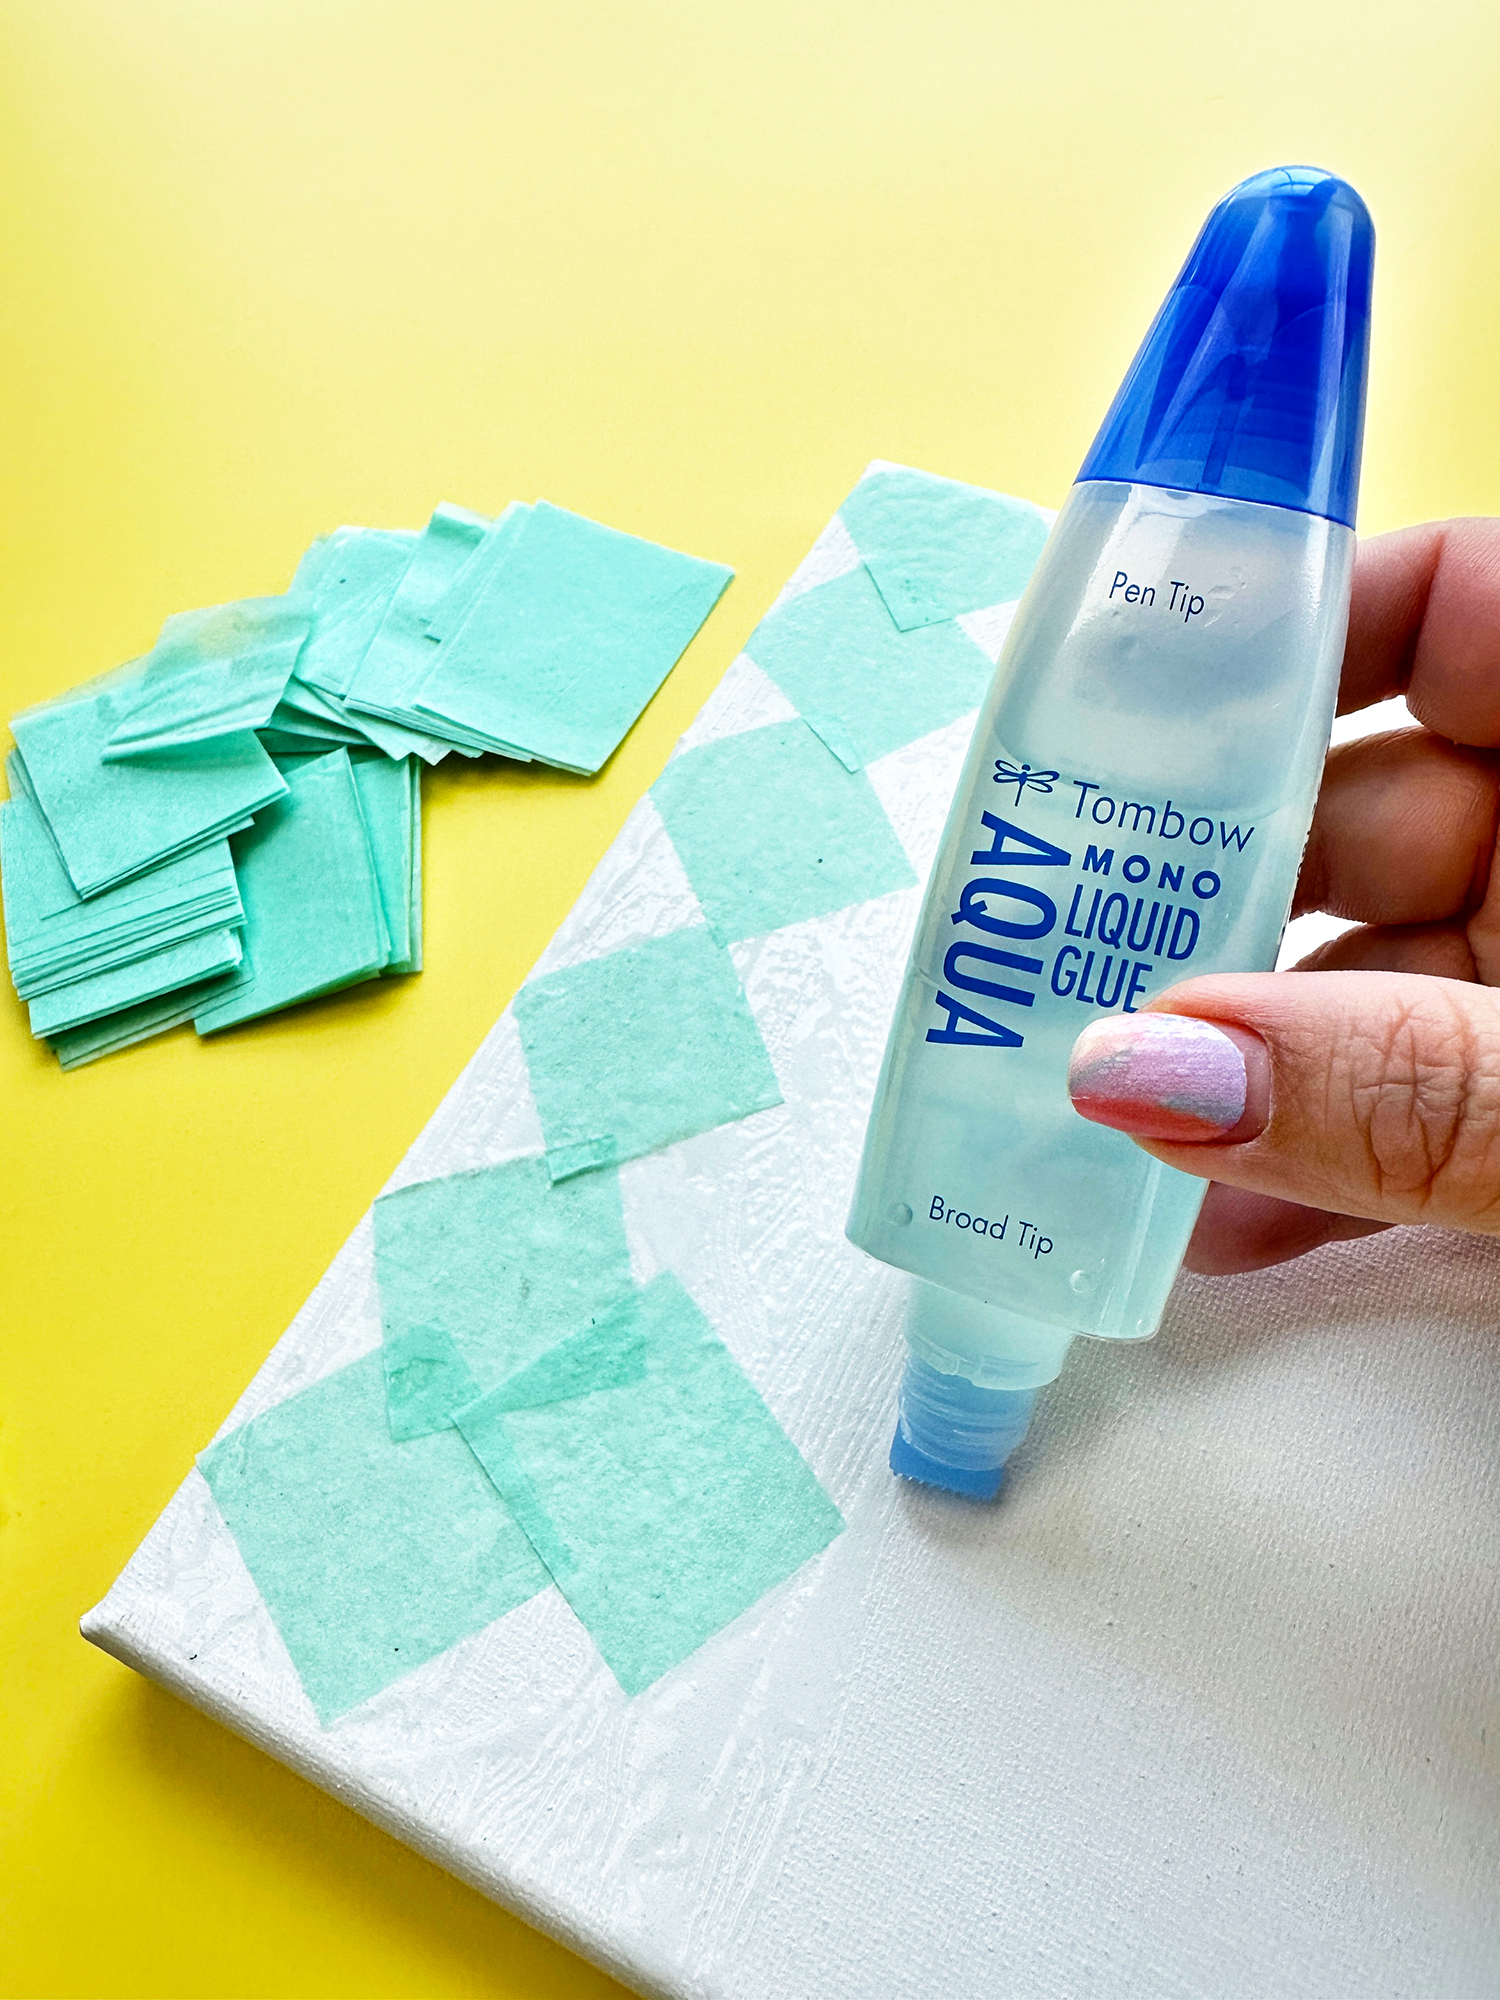 To cover the background use tissue paper. I used only one sheet to cut a lot of squares and rectangles. Use the broad tip of the Tombow MONO Aqua Liquid Glue to apply the glue on the background. I like the broad tip because then I don't have to use and clean a brush! #tombow